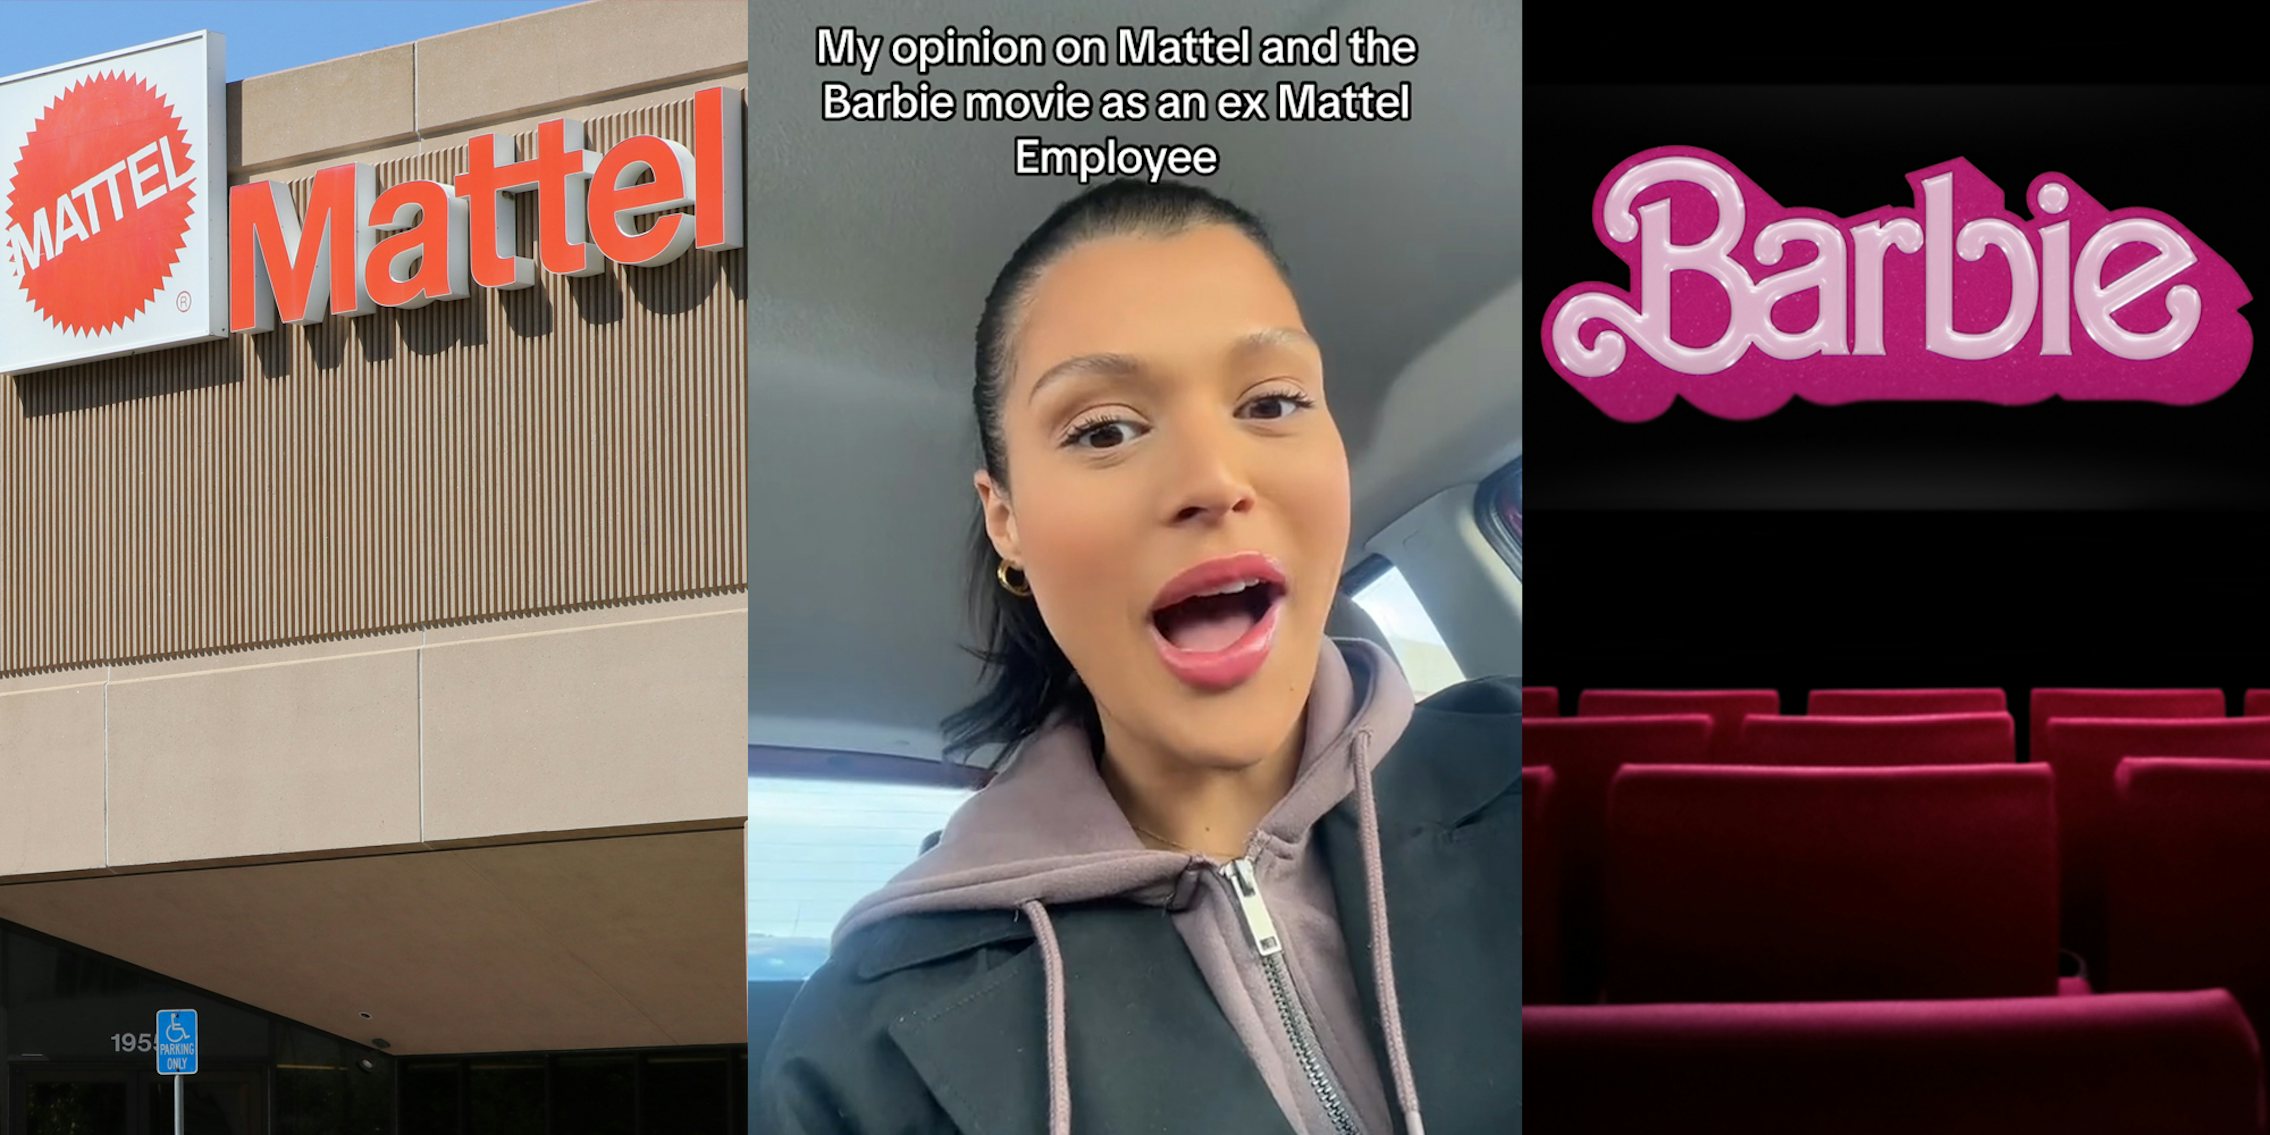 Mattel logo on building (l) former Mattel employee speaking in car with caption 'My opinion on Mattel and the Barbie movie as an ex Mattel Employee' (c) Barbie movie on theatre screen with movie theatre seats (r)